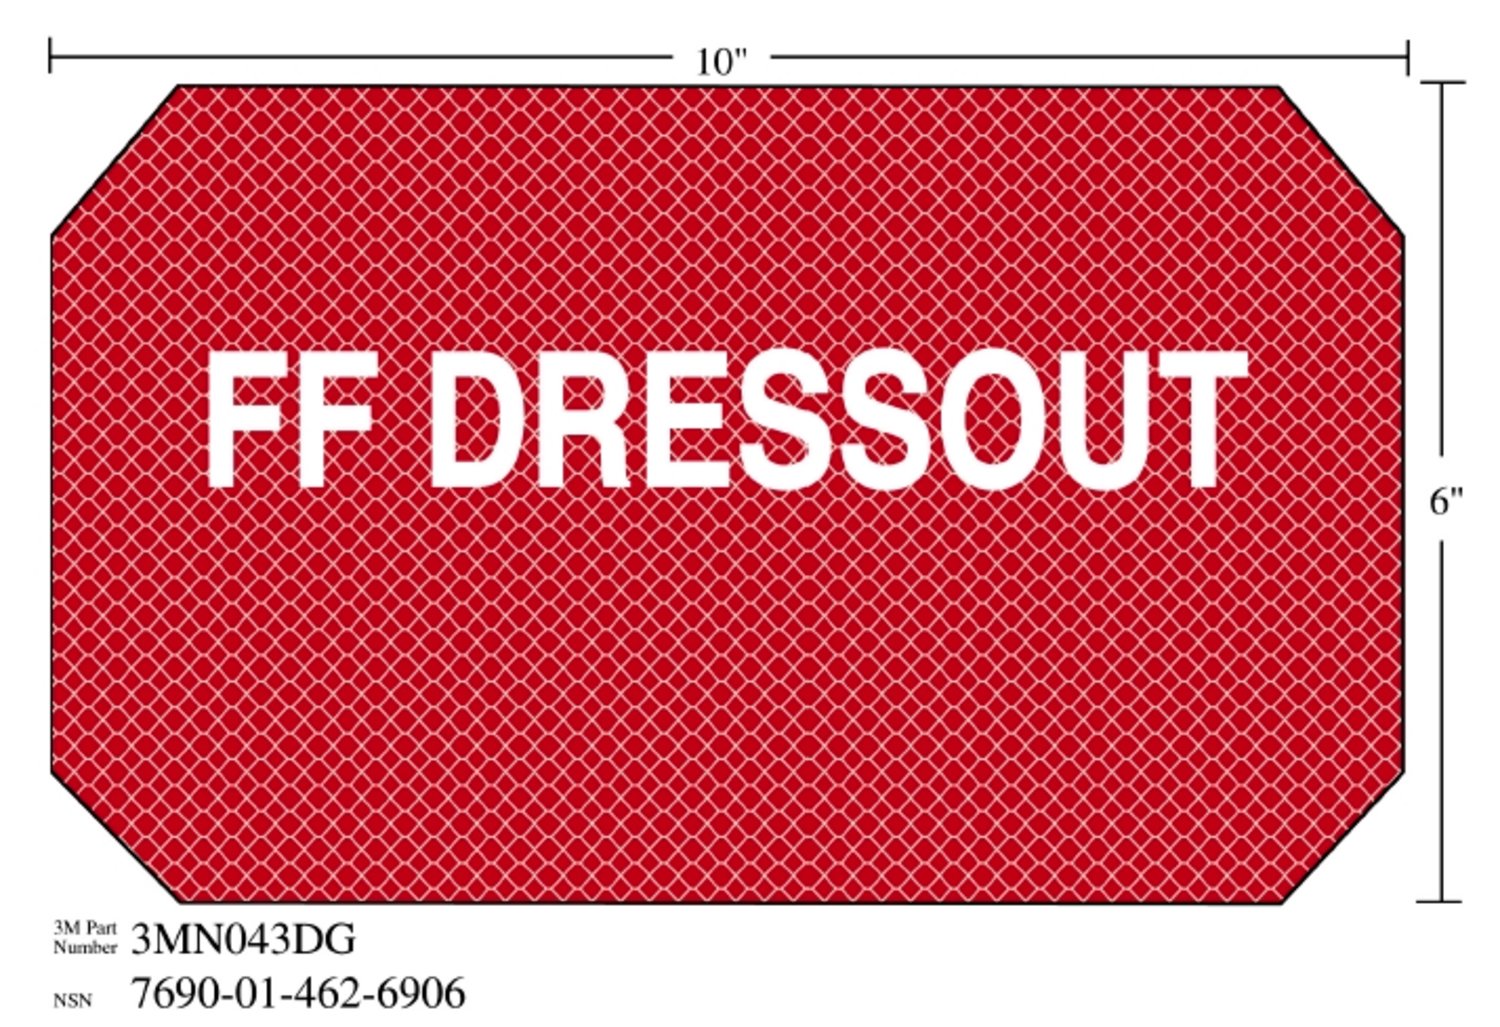 7010388683 - 3M Diamond Grade Damage Control Sign 3MN043DG, "FF DRESSOUT", 10 in x
6 in, 10/Package